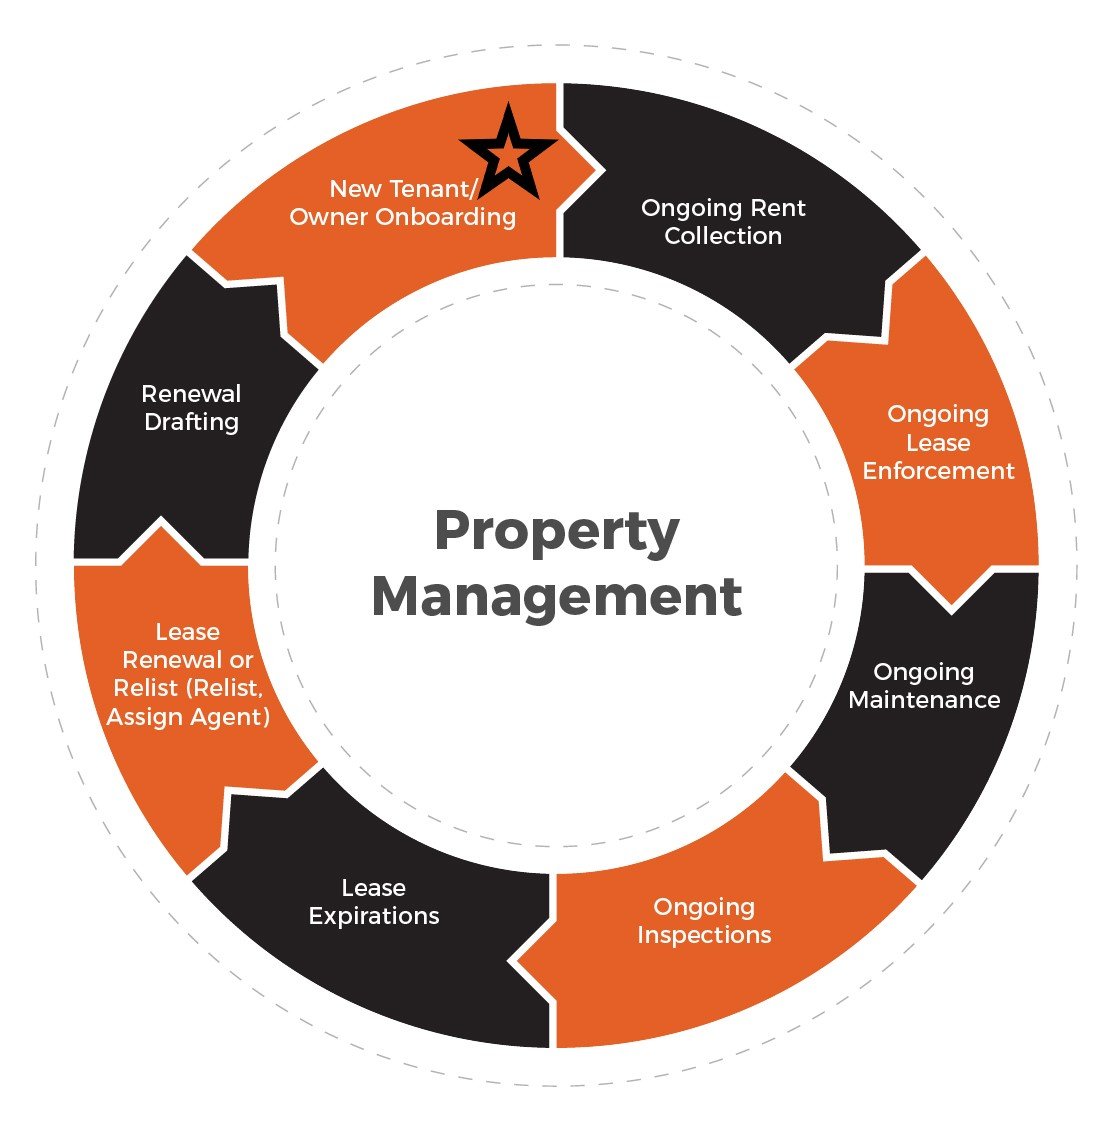 The Ongoing Property Management Phase